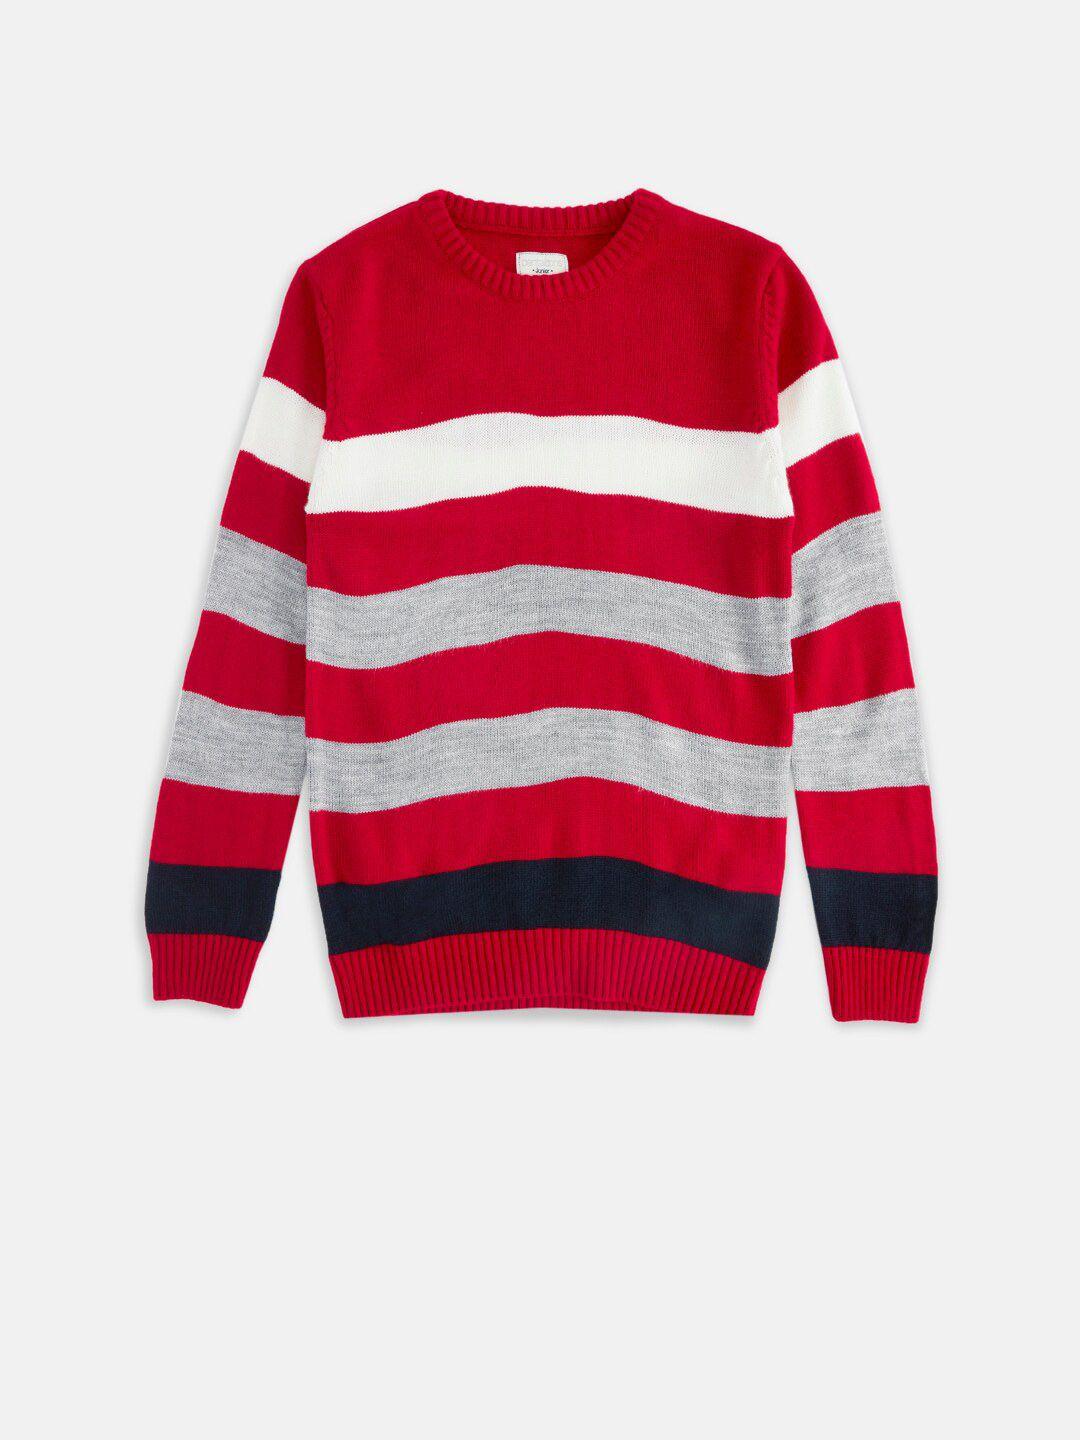 pantaloons junior boys red & white striped pullover sweater